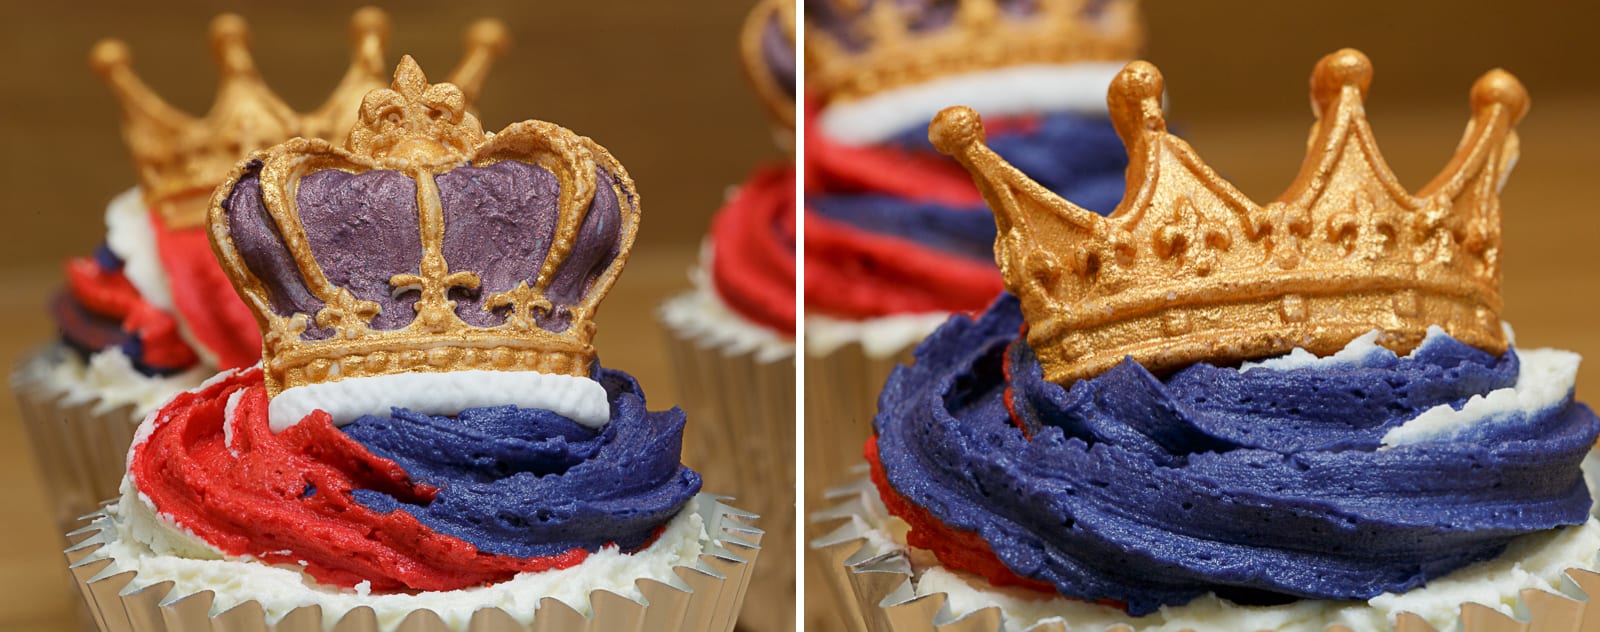 King and Queen decorated cupcakes